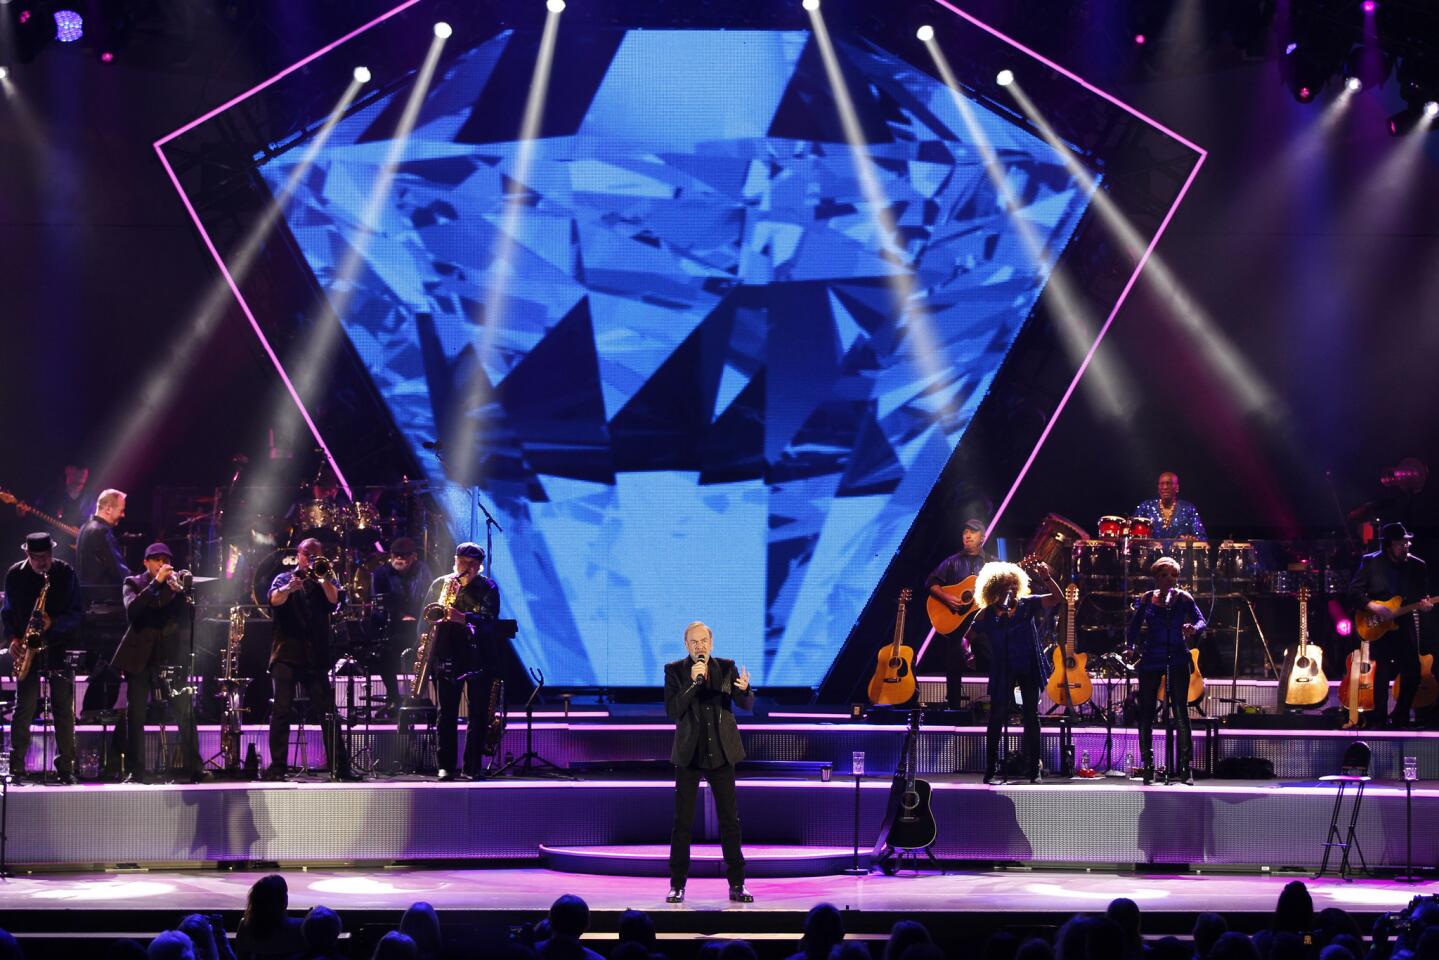 Singer Neil Diamond, with a not-so-subtle image in the background depicting his surname, performs at the Hollywood Bowl on Saturday night.